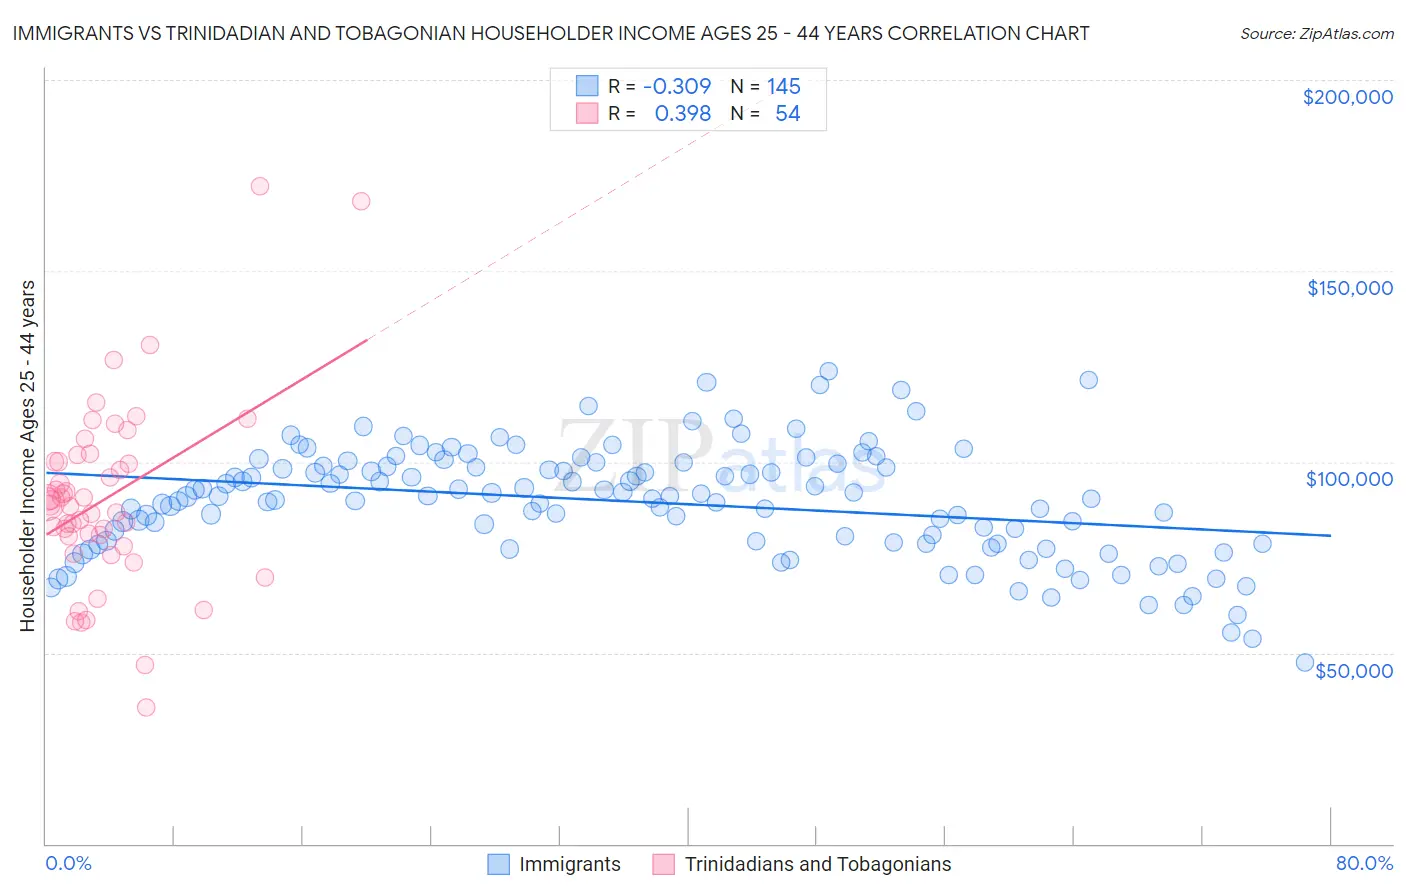 Immigrants vs Trinidadian and Tobagonian Householder Income Ages 25 - 44 years